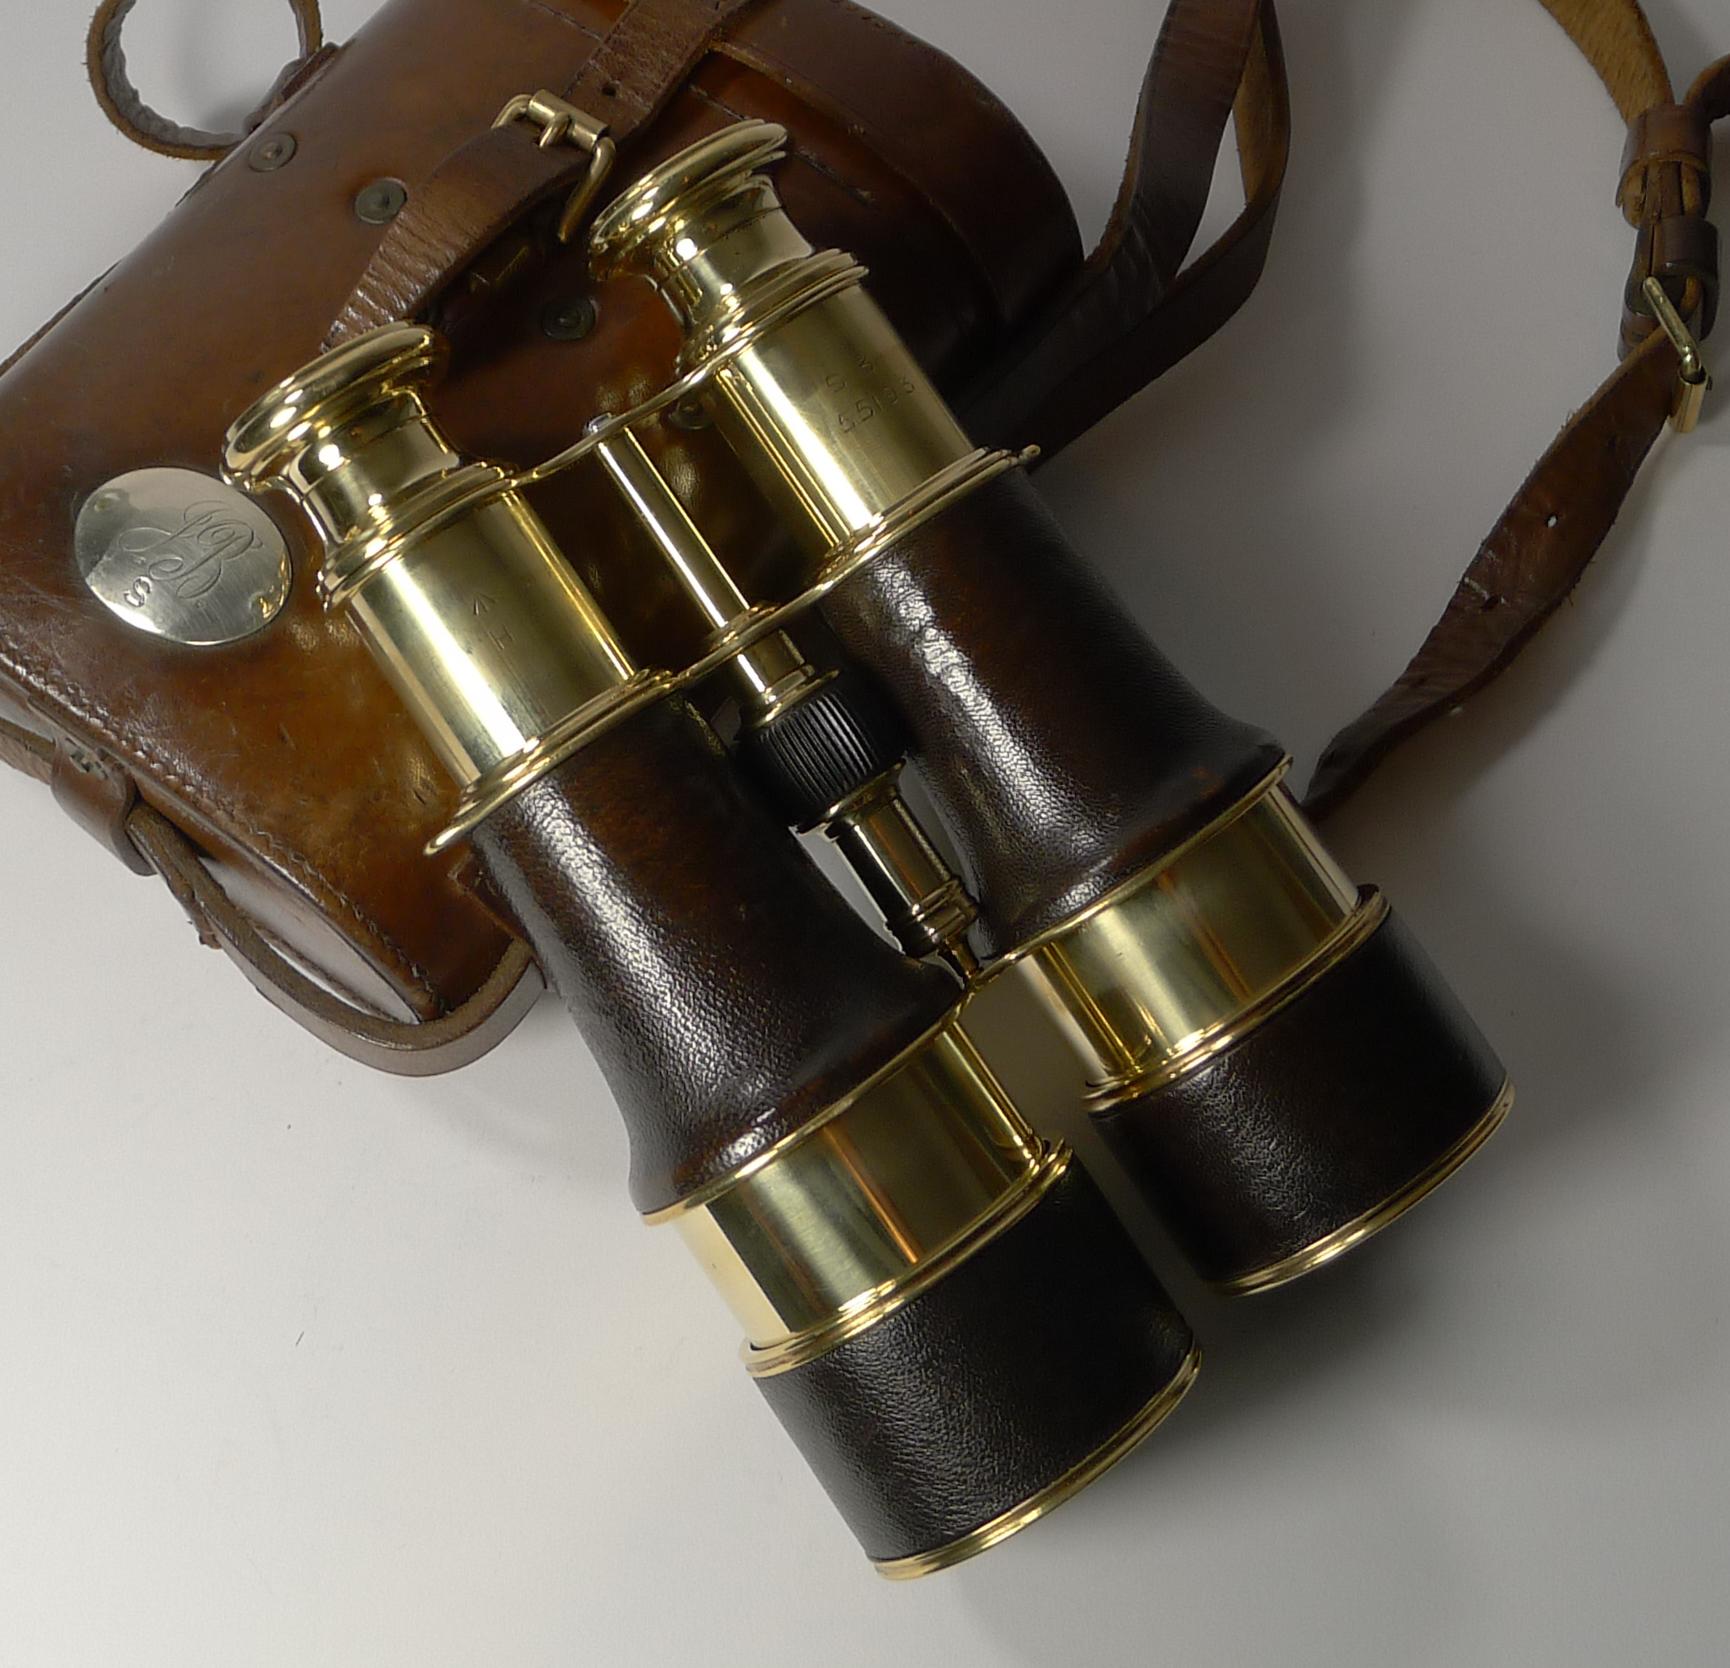 A fabulous pair of French made World War 1 British Officers Military binoculars with the brass on the binoculars with the British military crows foot mark. They were manufactured by the creme de la creme of makers and signed on both eyepieces,